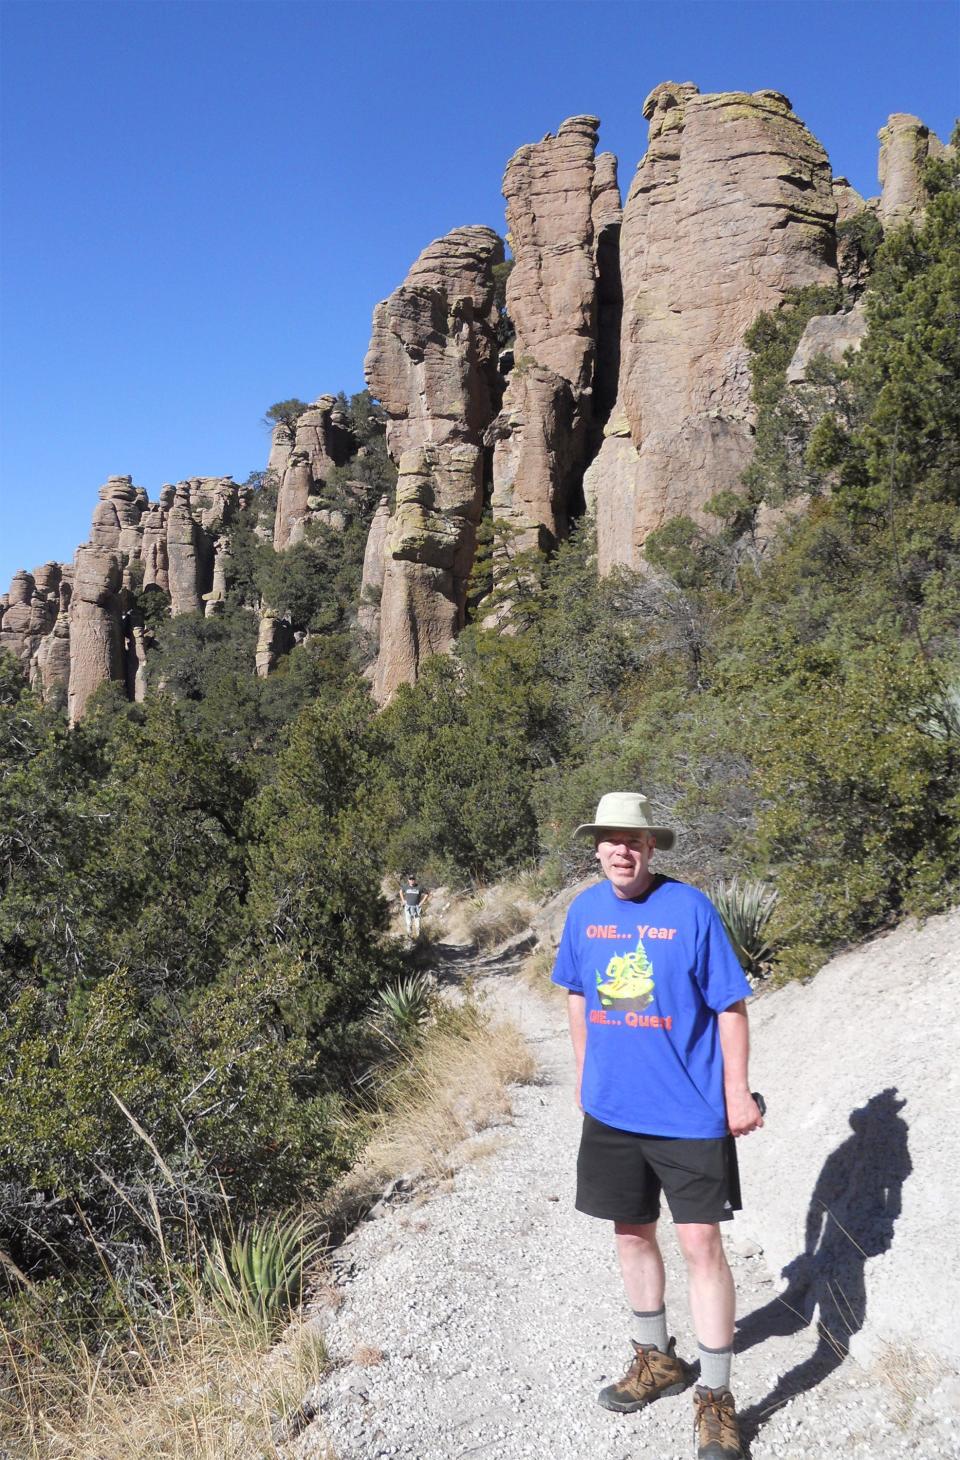 Thomas Wright visits the Chiricahua National Monument in Arizona. Wright visited every U.S. national park this year.